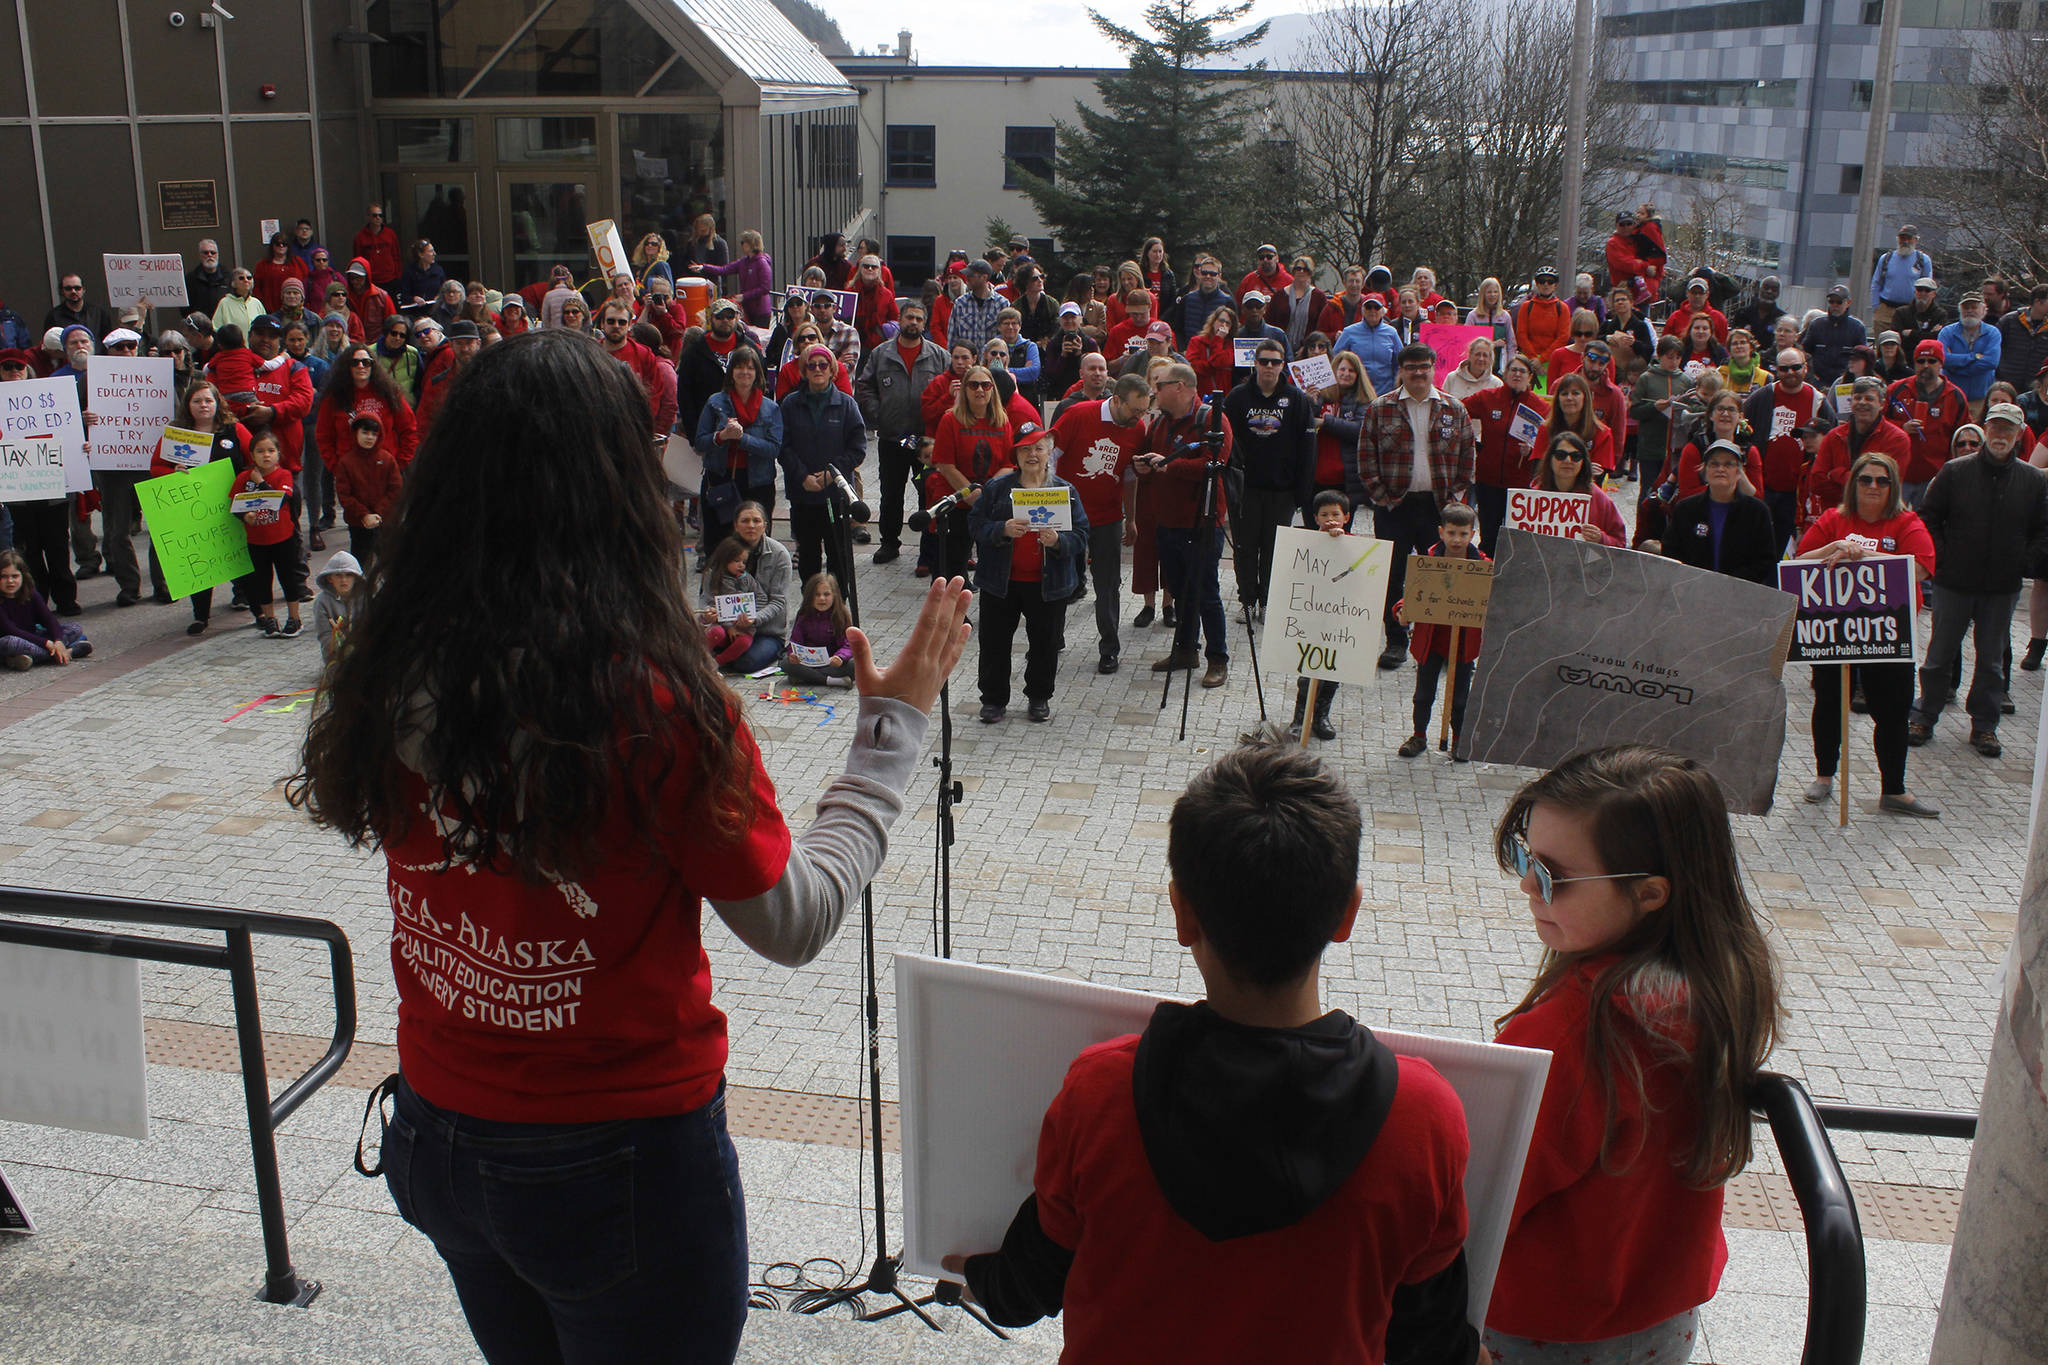 Thunder Mountain High School student Kaylani Topou speaks to a crowd at the Fund Our Future rally at the Alaska State Capitol on Saturday. (Alex McCarthy | Juneau Empire)